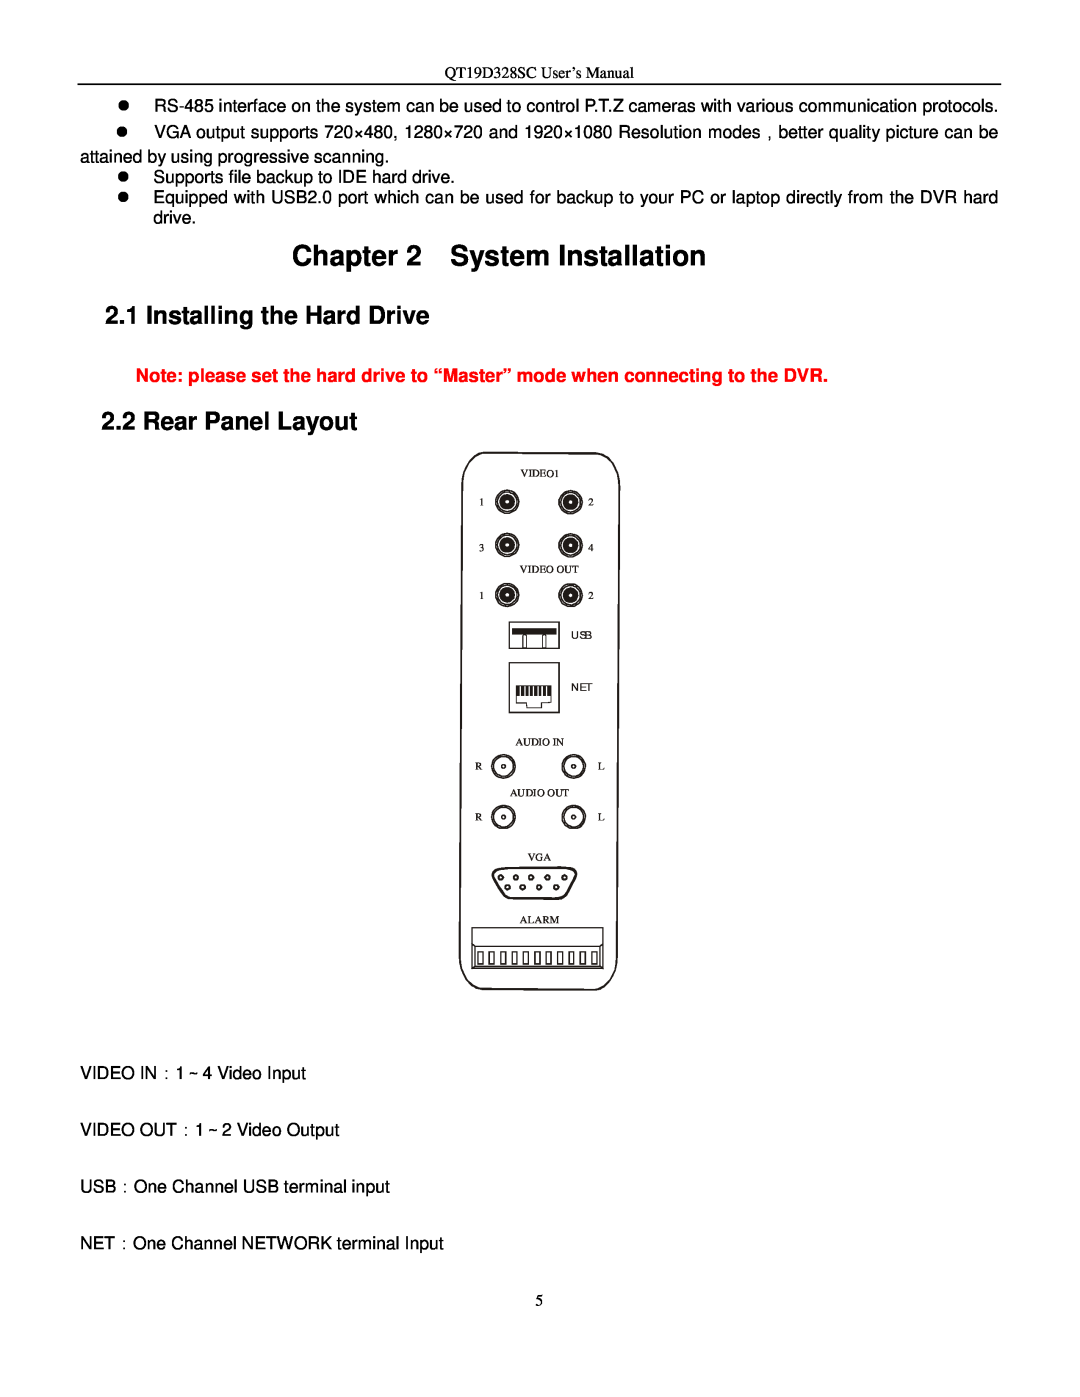 Q-See QT17D324SC user manual System Installation, Installing the Hard Drive, Rear Panel Layout 